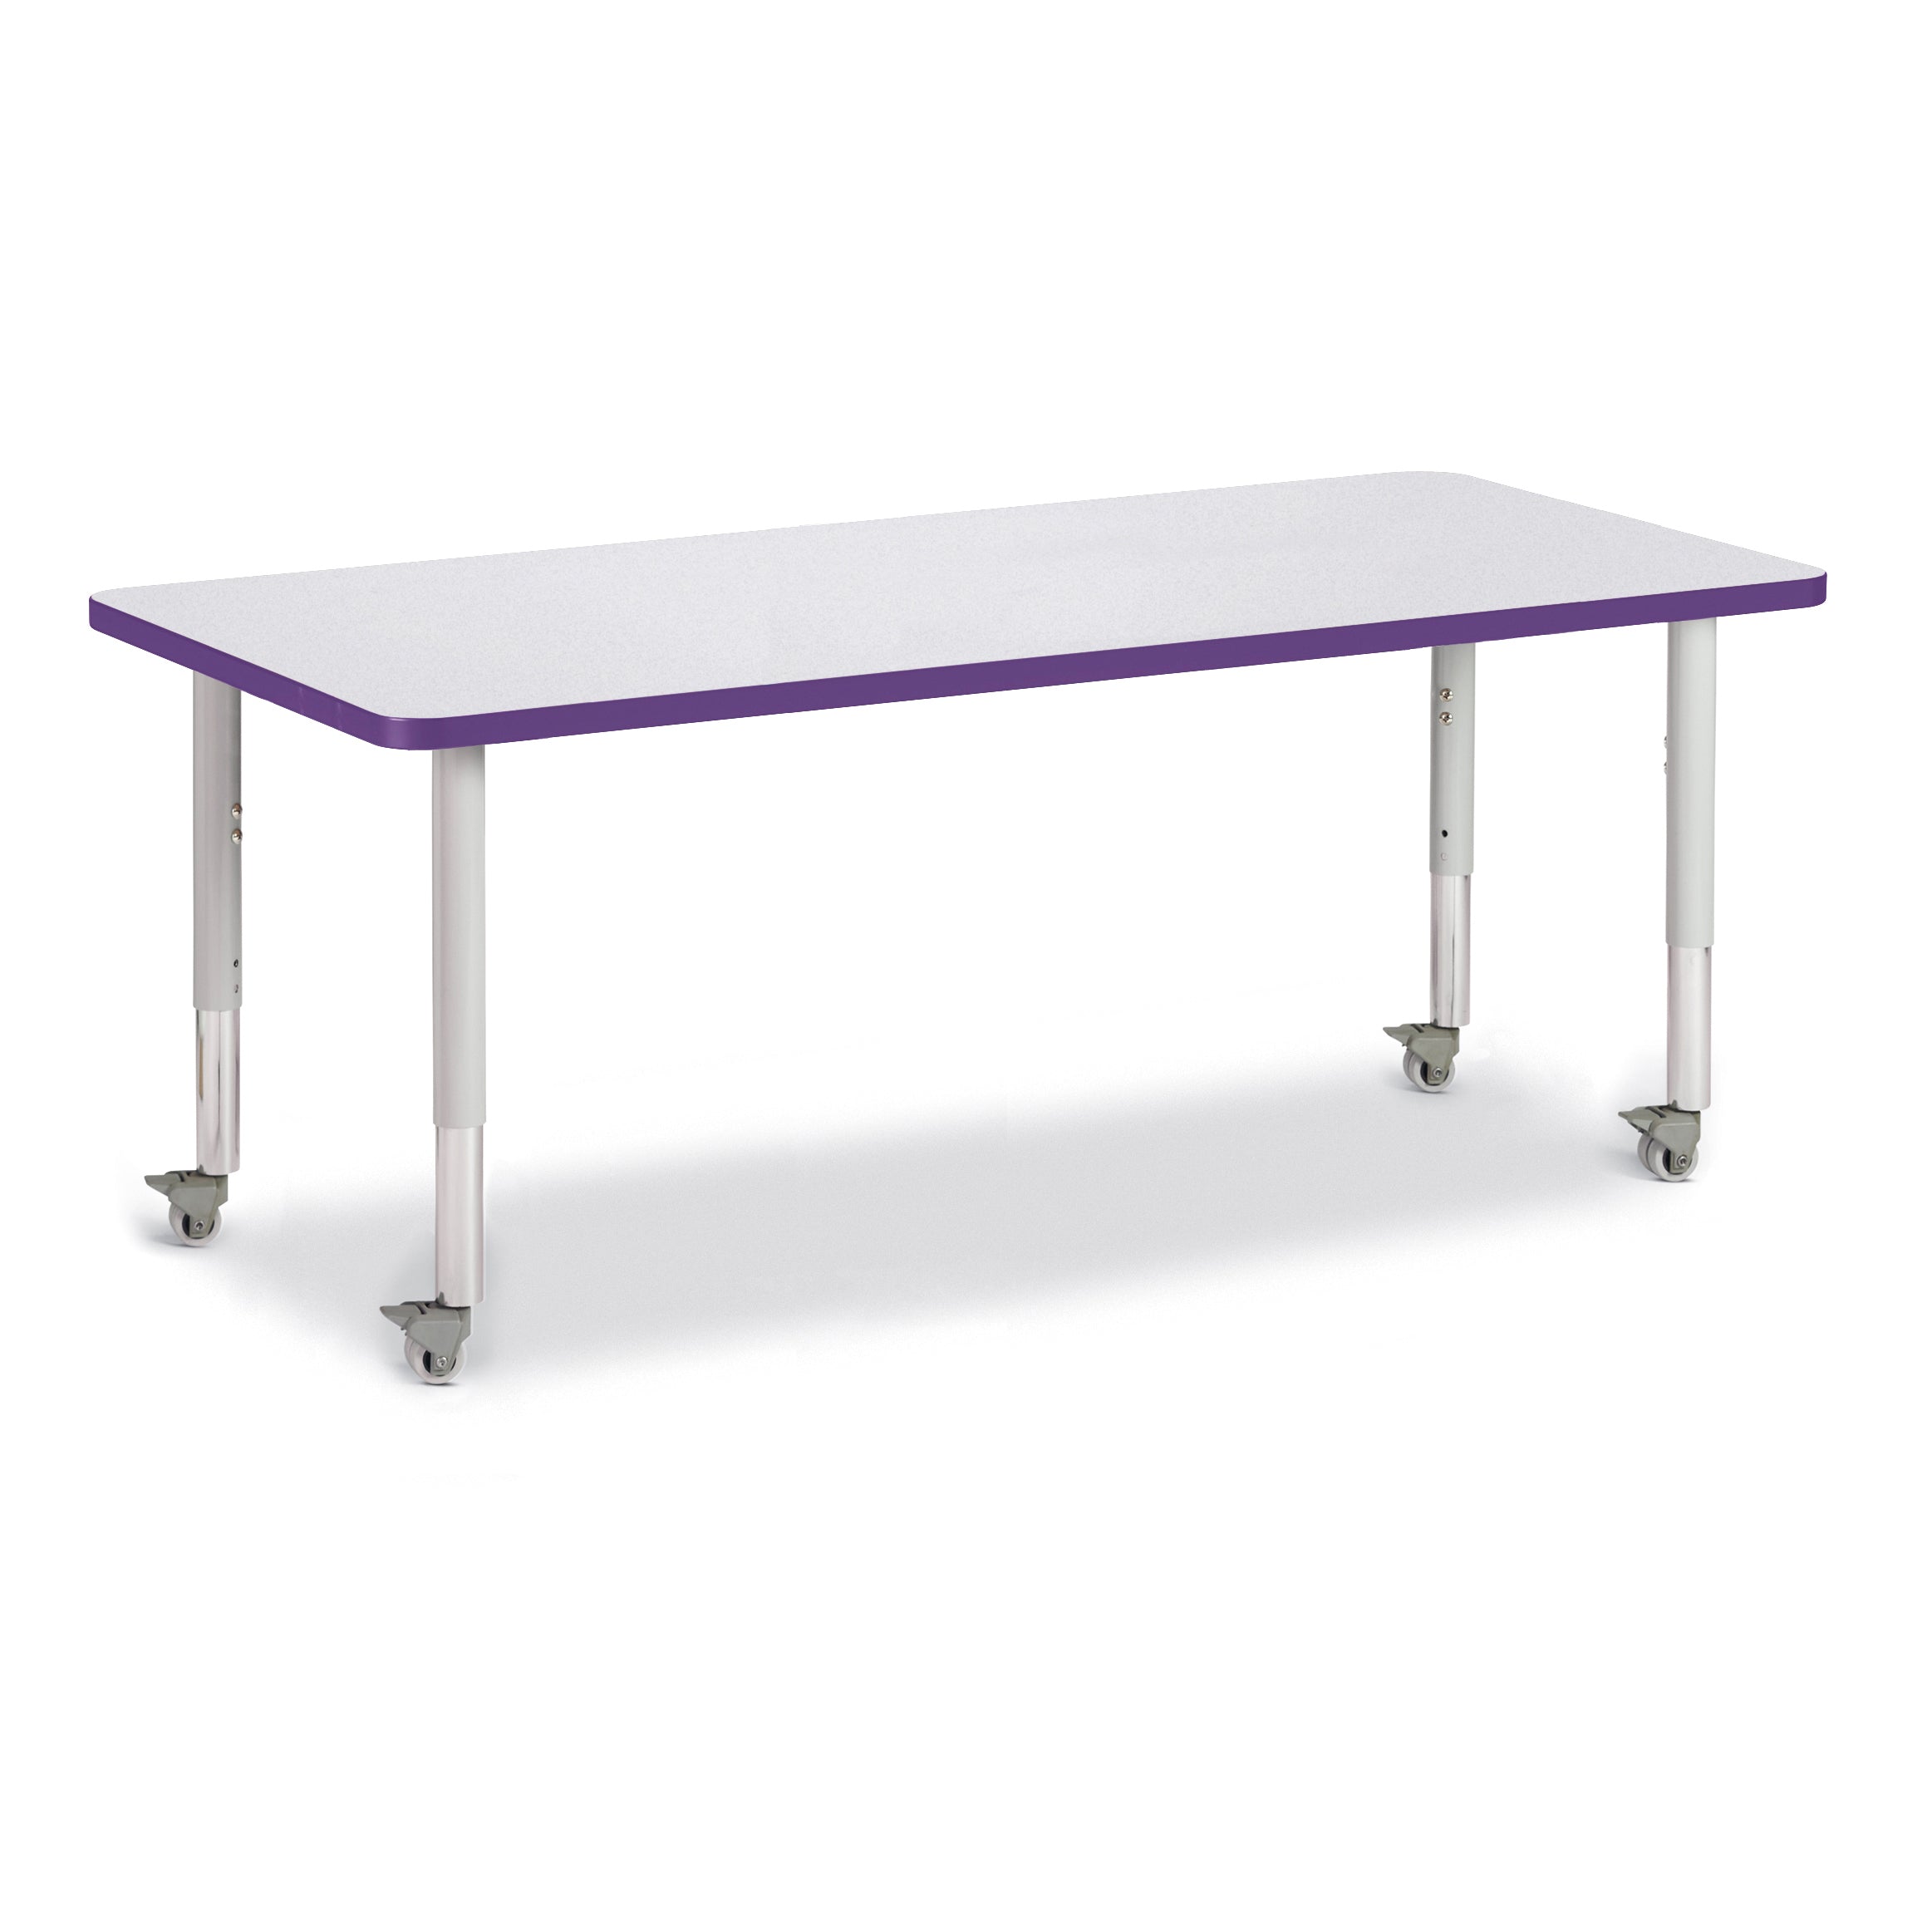 6413JCM004, Berries Rectangle Activity Table - 30" X 72", Mobile - Freckled Gray/Purple/Gray